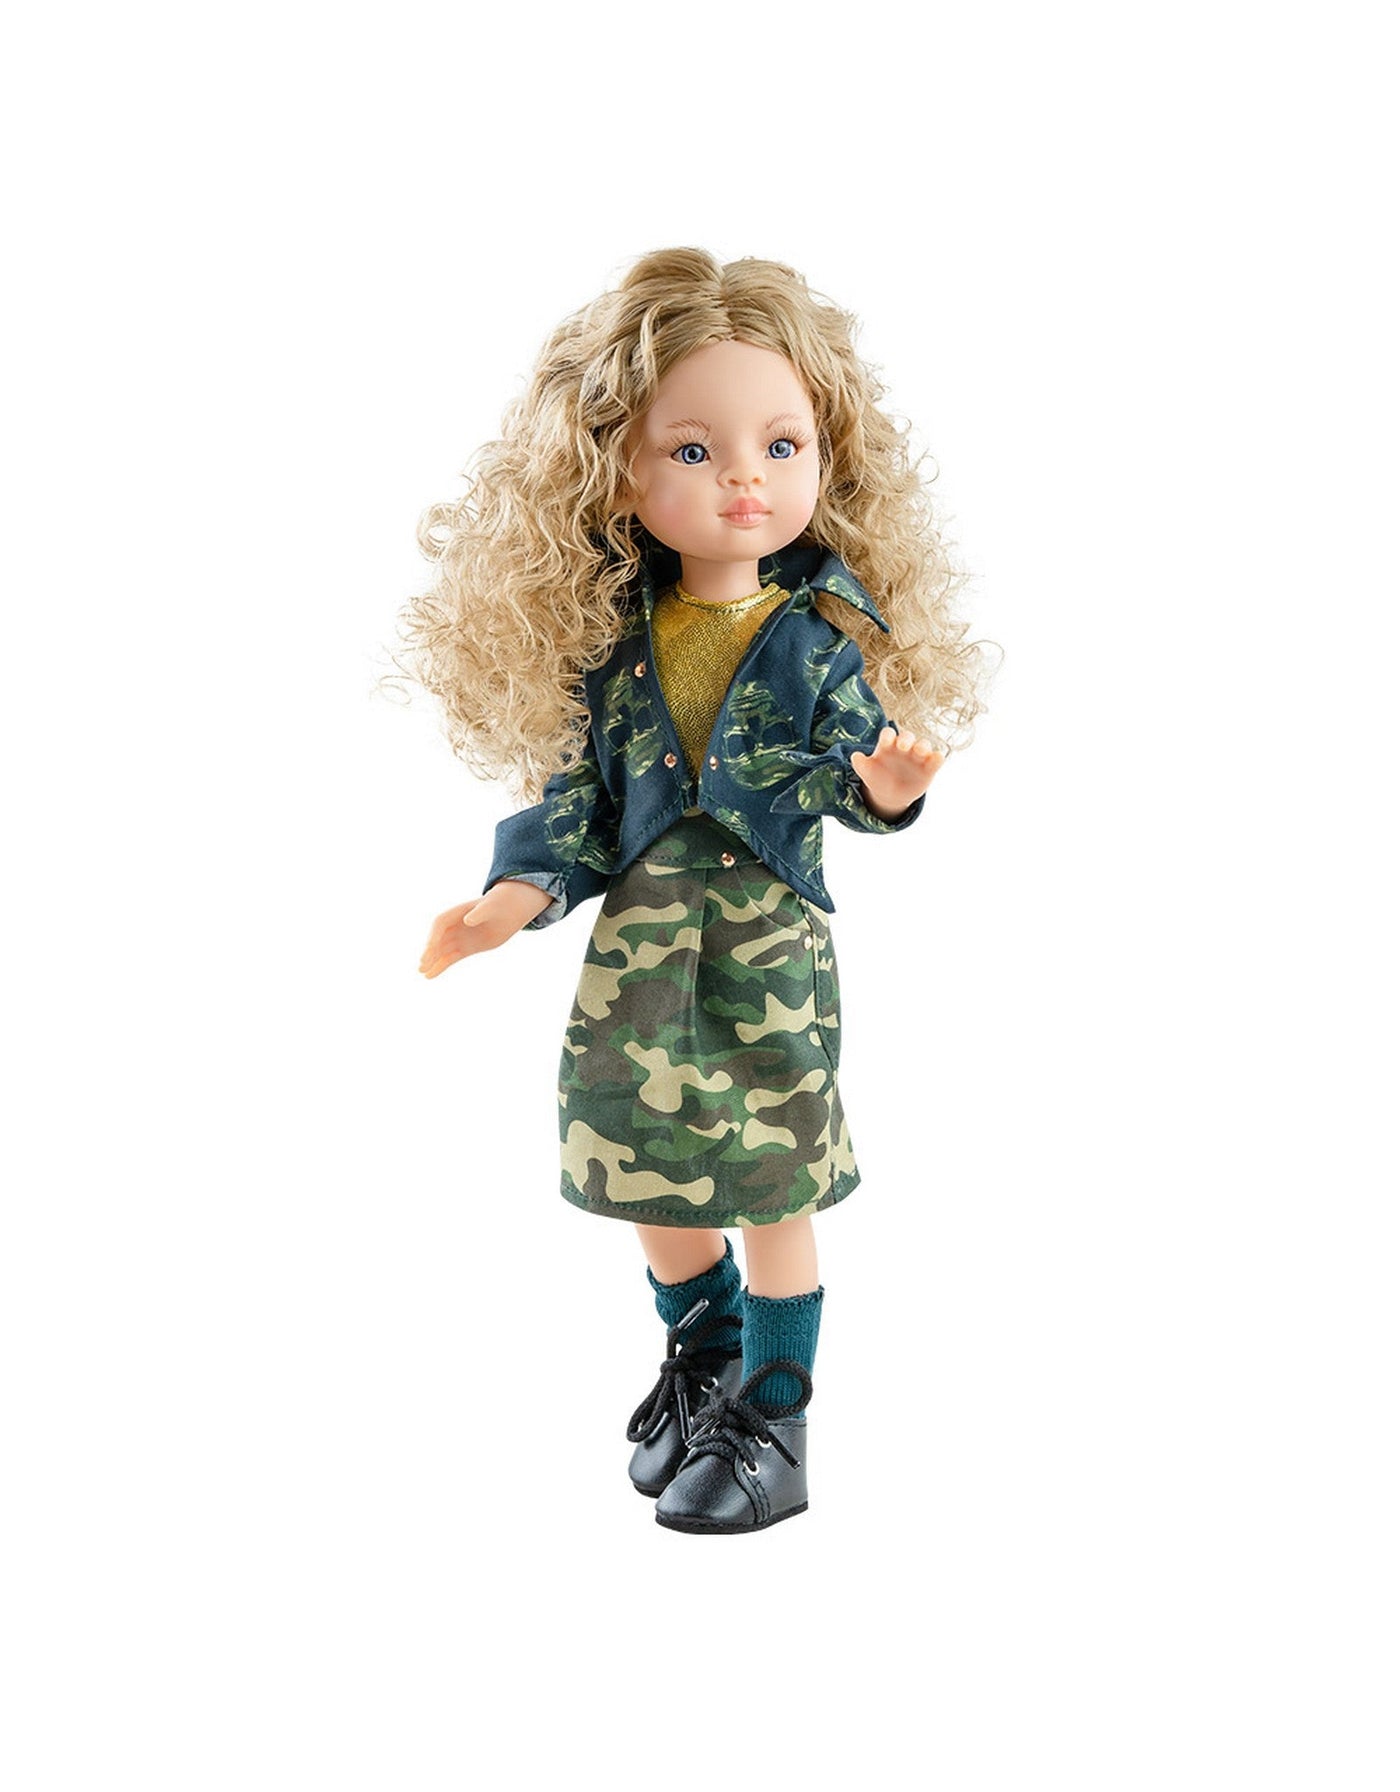 Las Amigas Articulated Doll - Manica with camouflage skirt and jacket set - Paola Reina